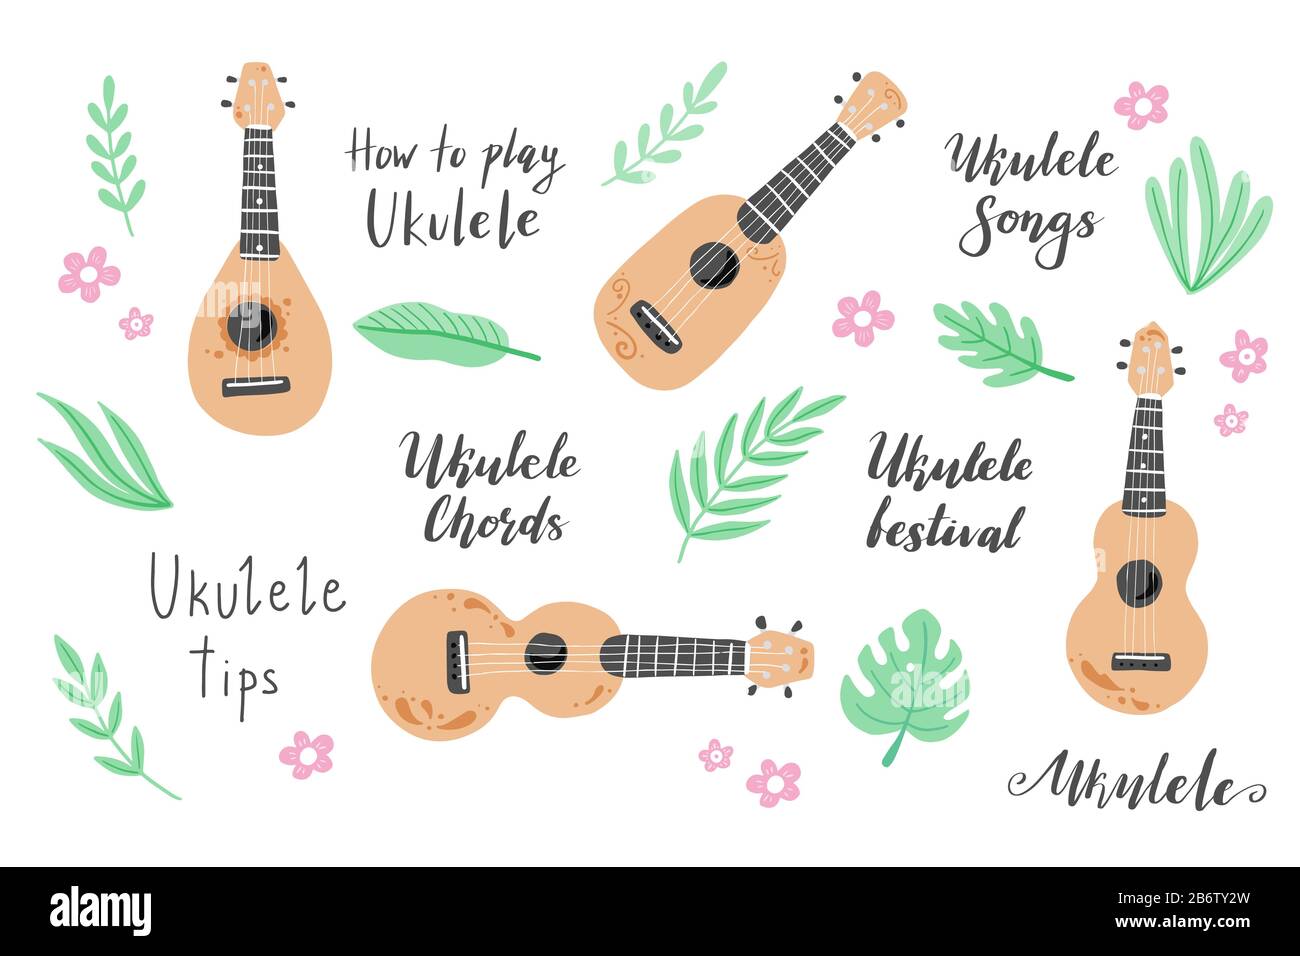 Set Of Cartoon Ukulele With Lettering Text For Ukulele Course Channel Logo Design Small Guitar With Tropic Leaf Floral Decoration Of Hawaii Style Vector Illuatration Of Hand Drawn Style Stock Vector Image